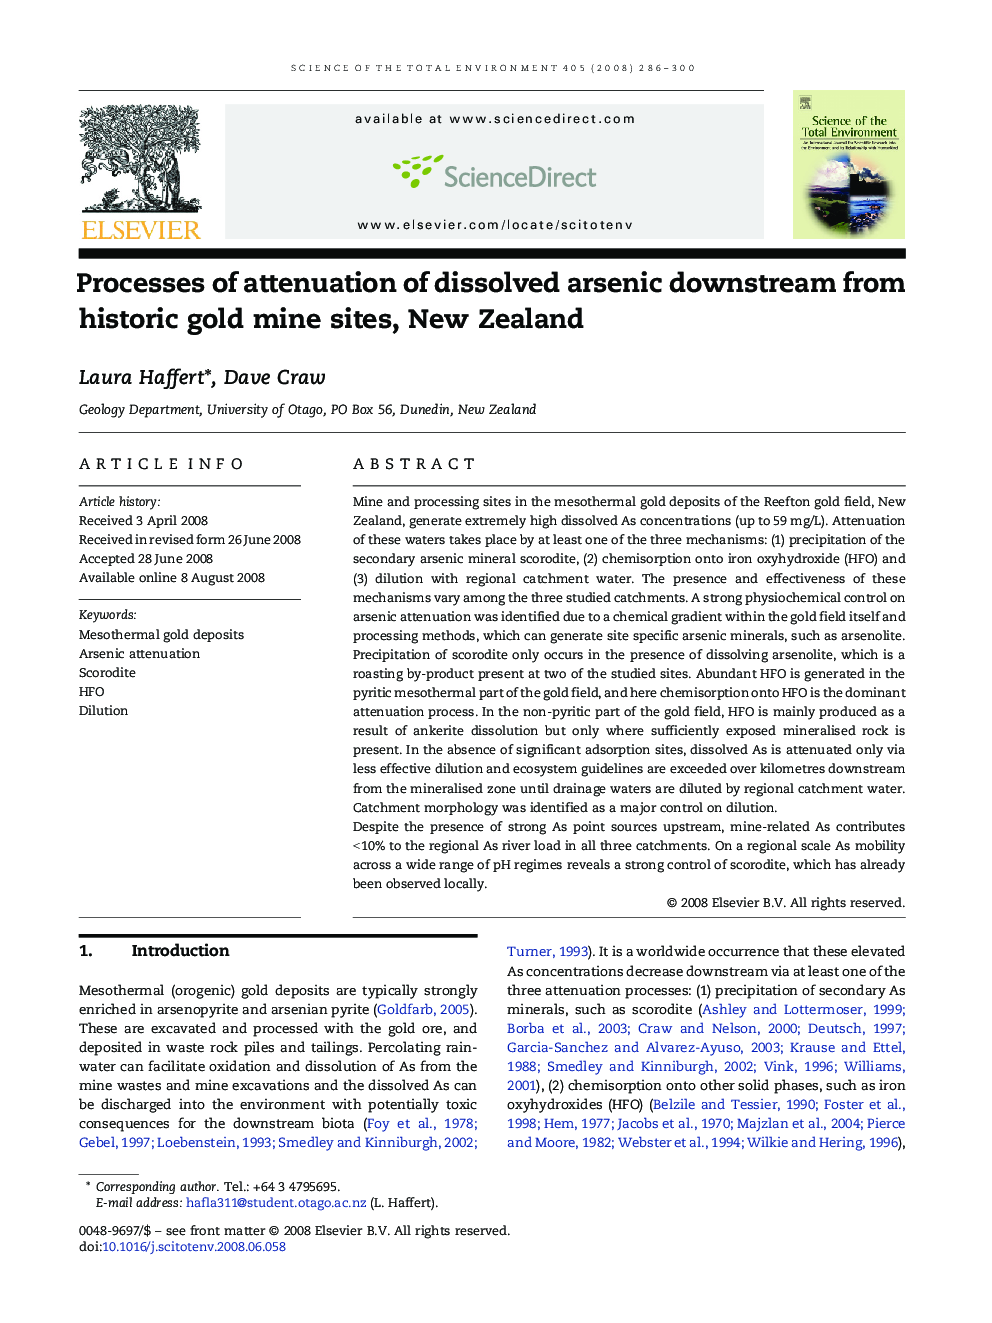 Processes of attenuation of dissolved arsenic downstream from historic gold mine sites, New Zealand